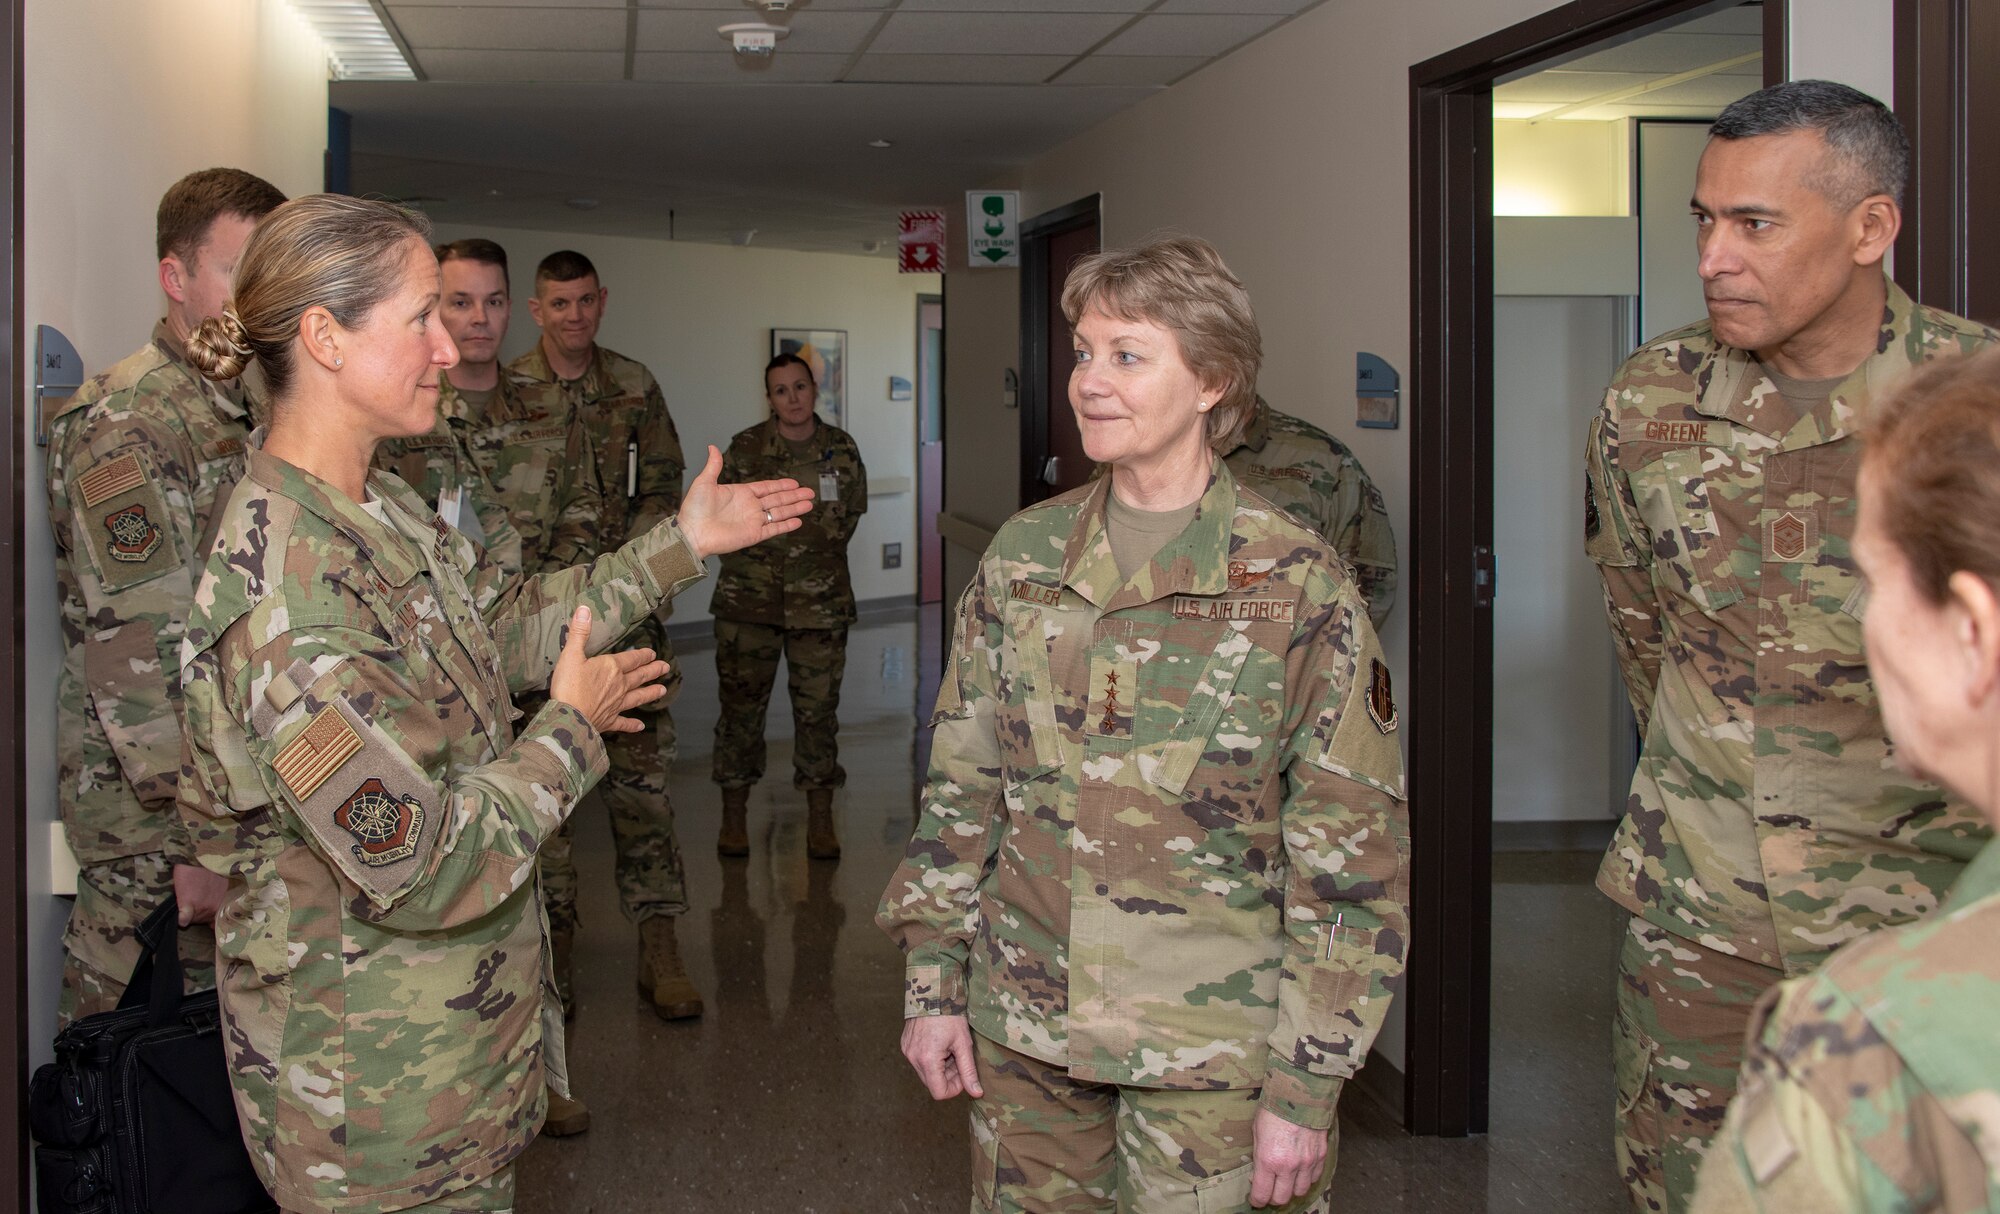 U.S. Air Force Gen. Maryanne Miller, center, Air Mobility Command commander, and Chief Master Sgt. Terrence Greene, right, AMC command chief, listen to a presentation given by Col. Kristen Beals, left, 60th Medical Group commander, during a visit to David Grant USAF Medical Center, Travis Air Force Base, California, April 16, 2019. During the four-day base tour Miller and Greene met with Airmen across Travis to see firsthand how the base enhances AMC’s global mobility capabilities. (U.S. Air Force photo by Heide Couch)